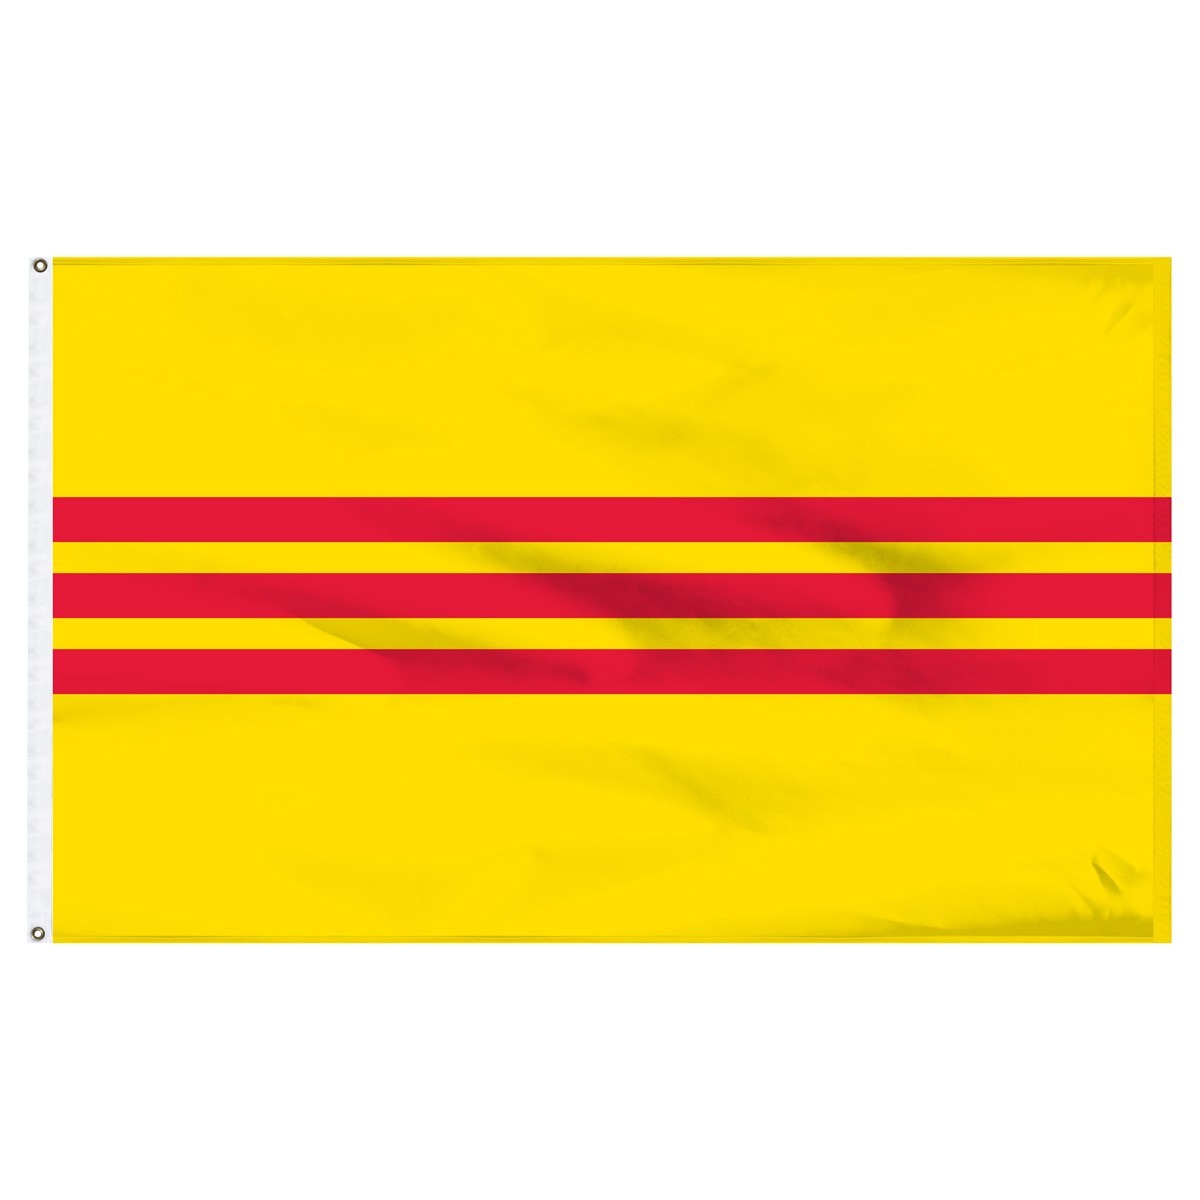 South Vietnam 2ft x 3ft High Quality Outdoor Nylon Flag